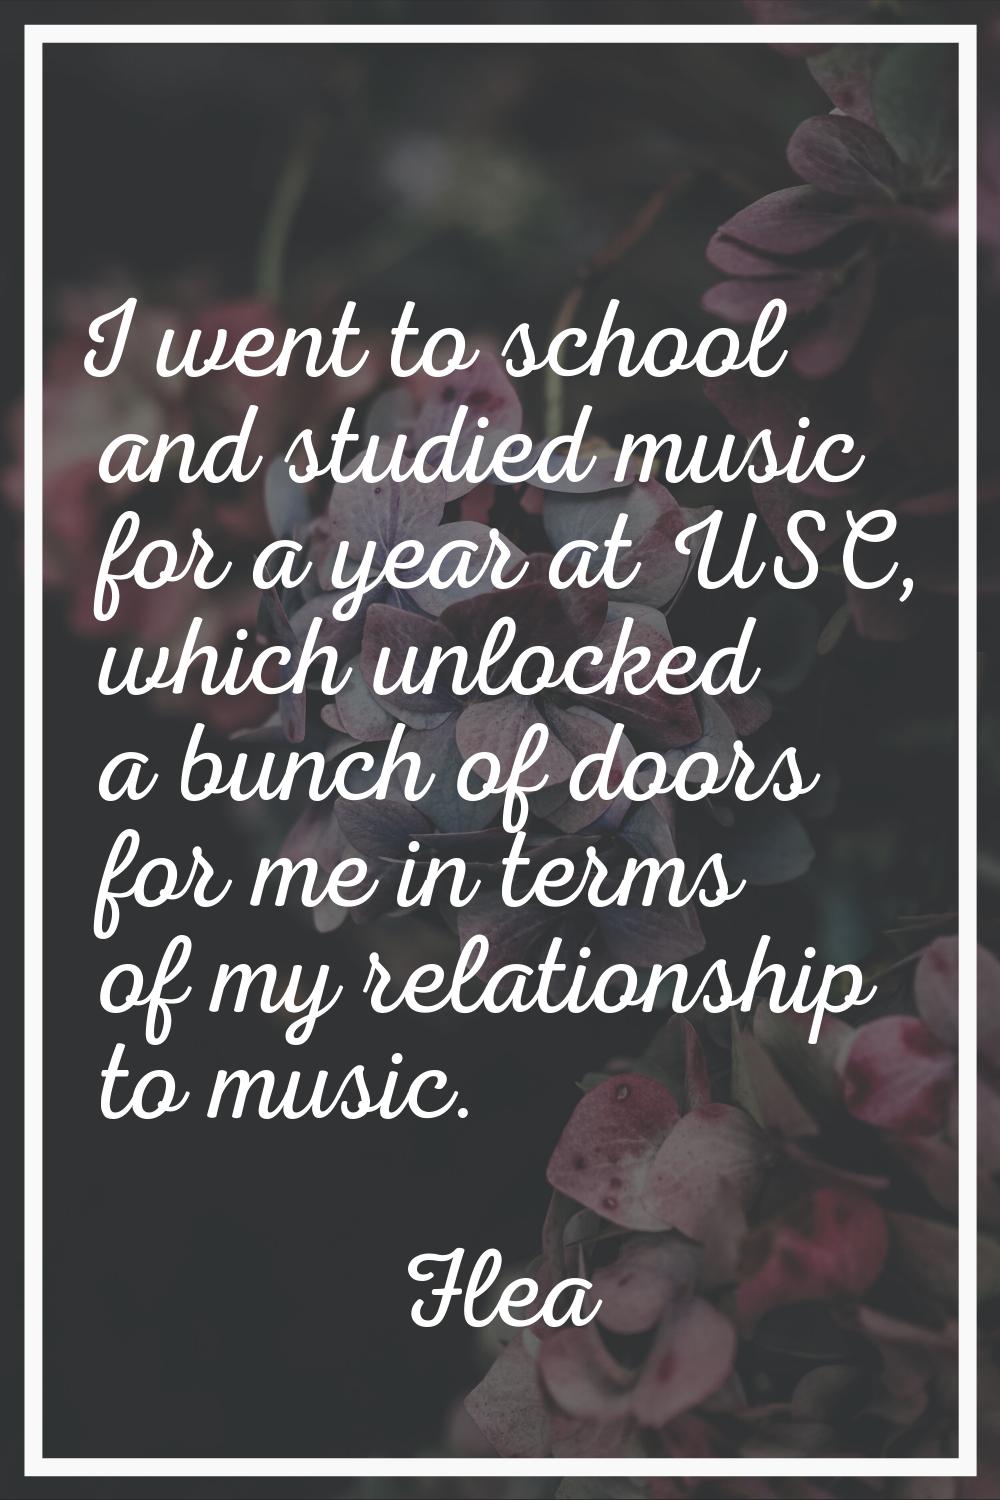 I went to school and studied music for a year at USC, which unlocked a bunch of doors for me in ter